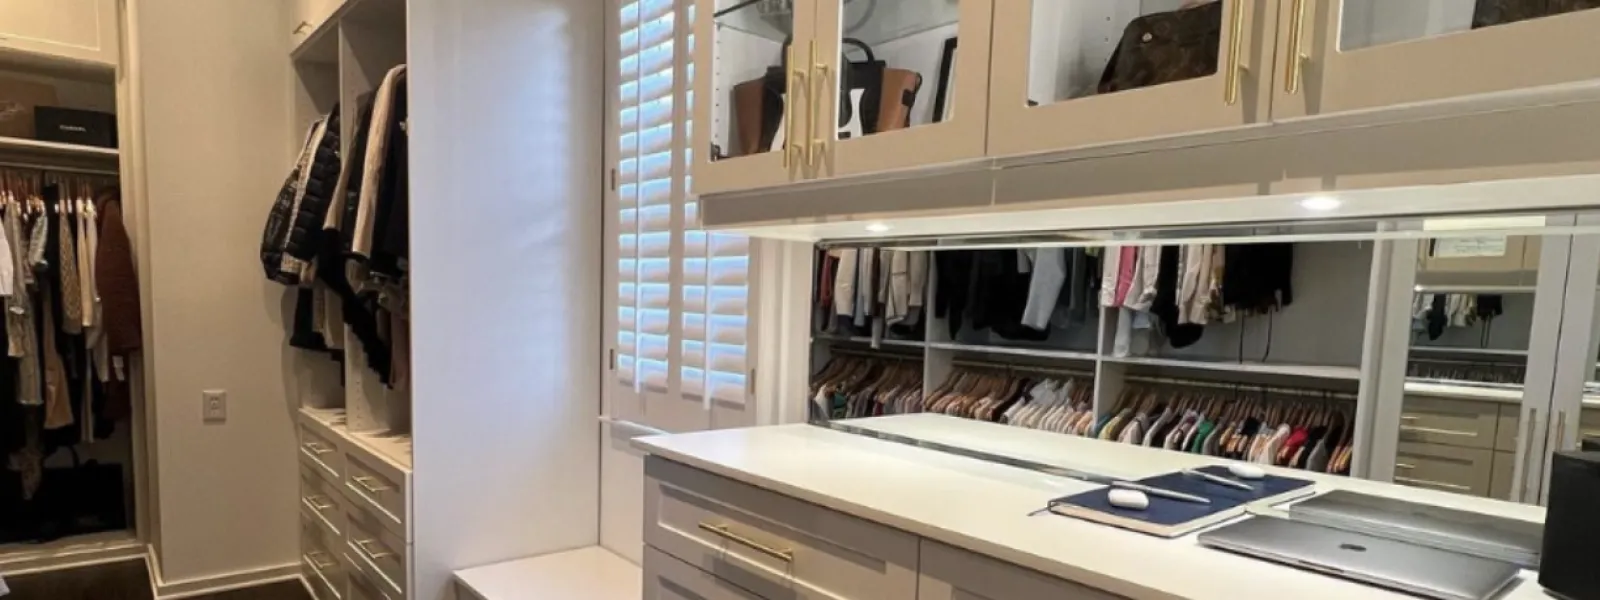 Custom Closet That Adapts to Your Changing Needs